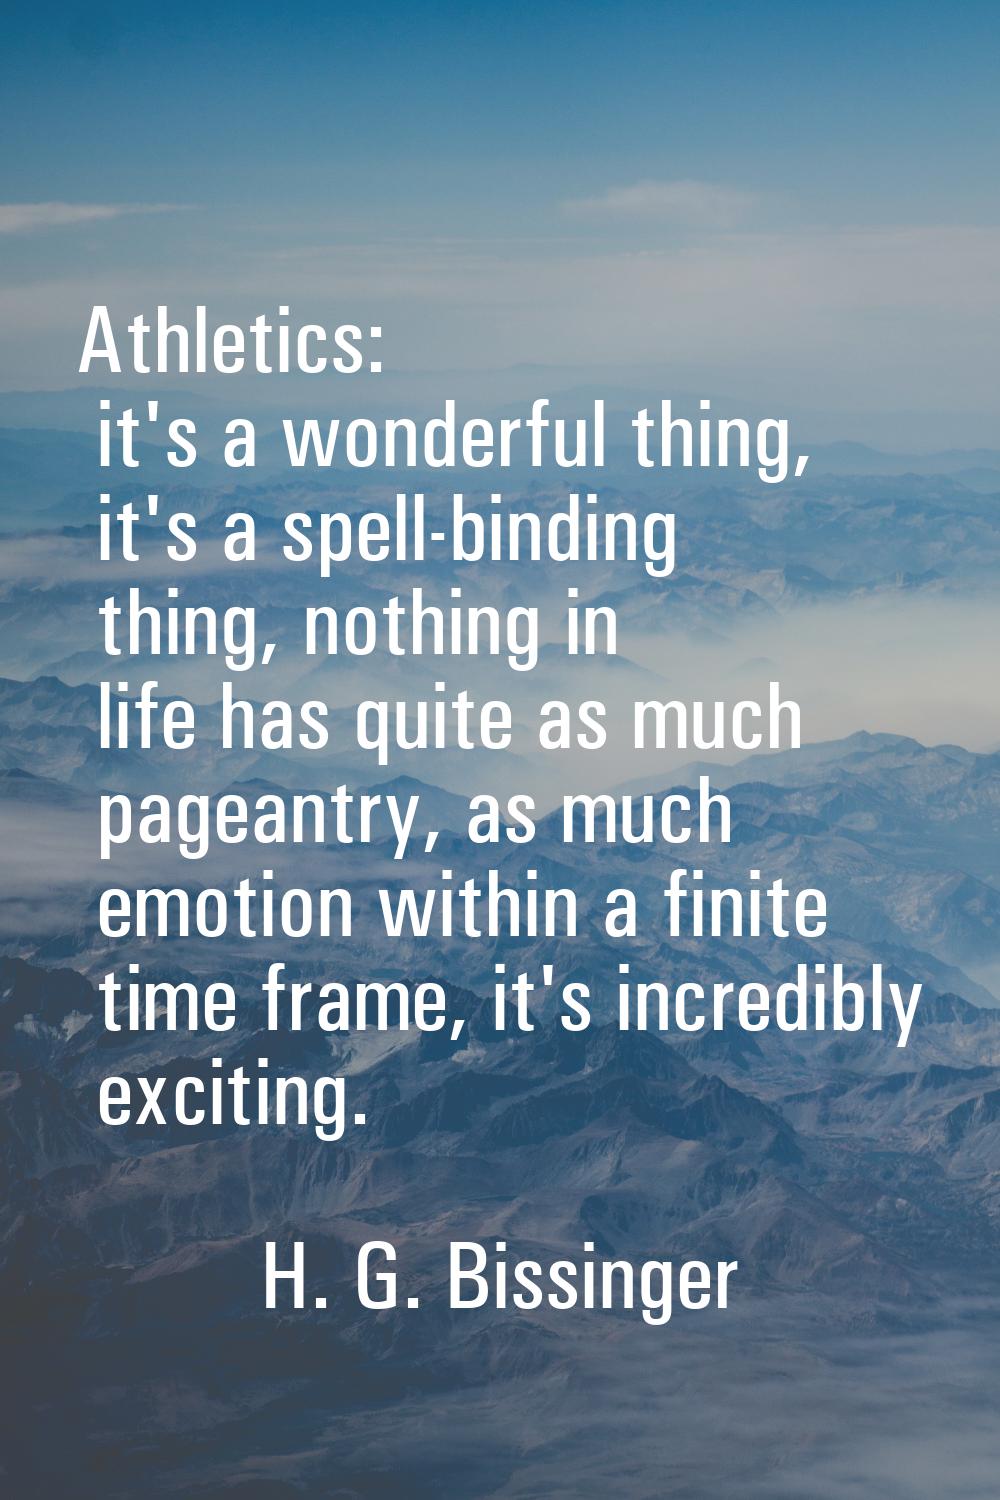 Athletics: it's a wonderful thing, it's a spell-binding thing, nothing in life has quite as much pa